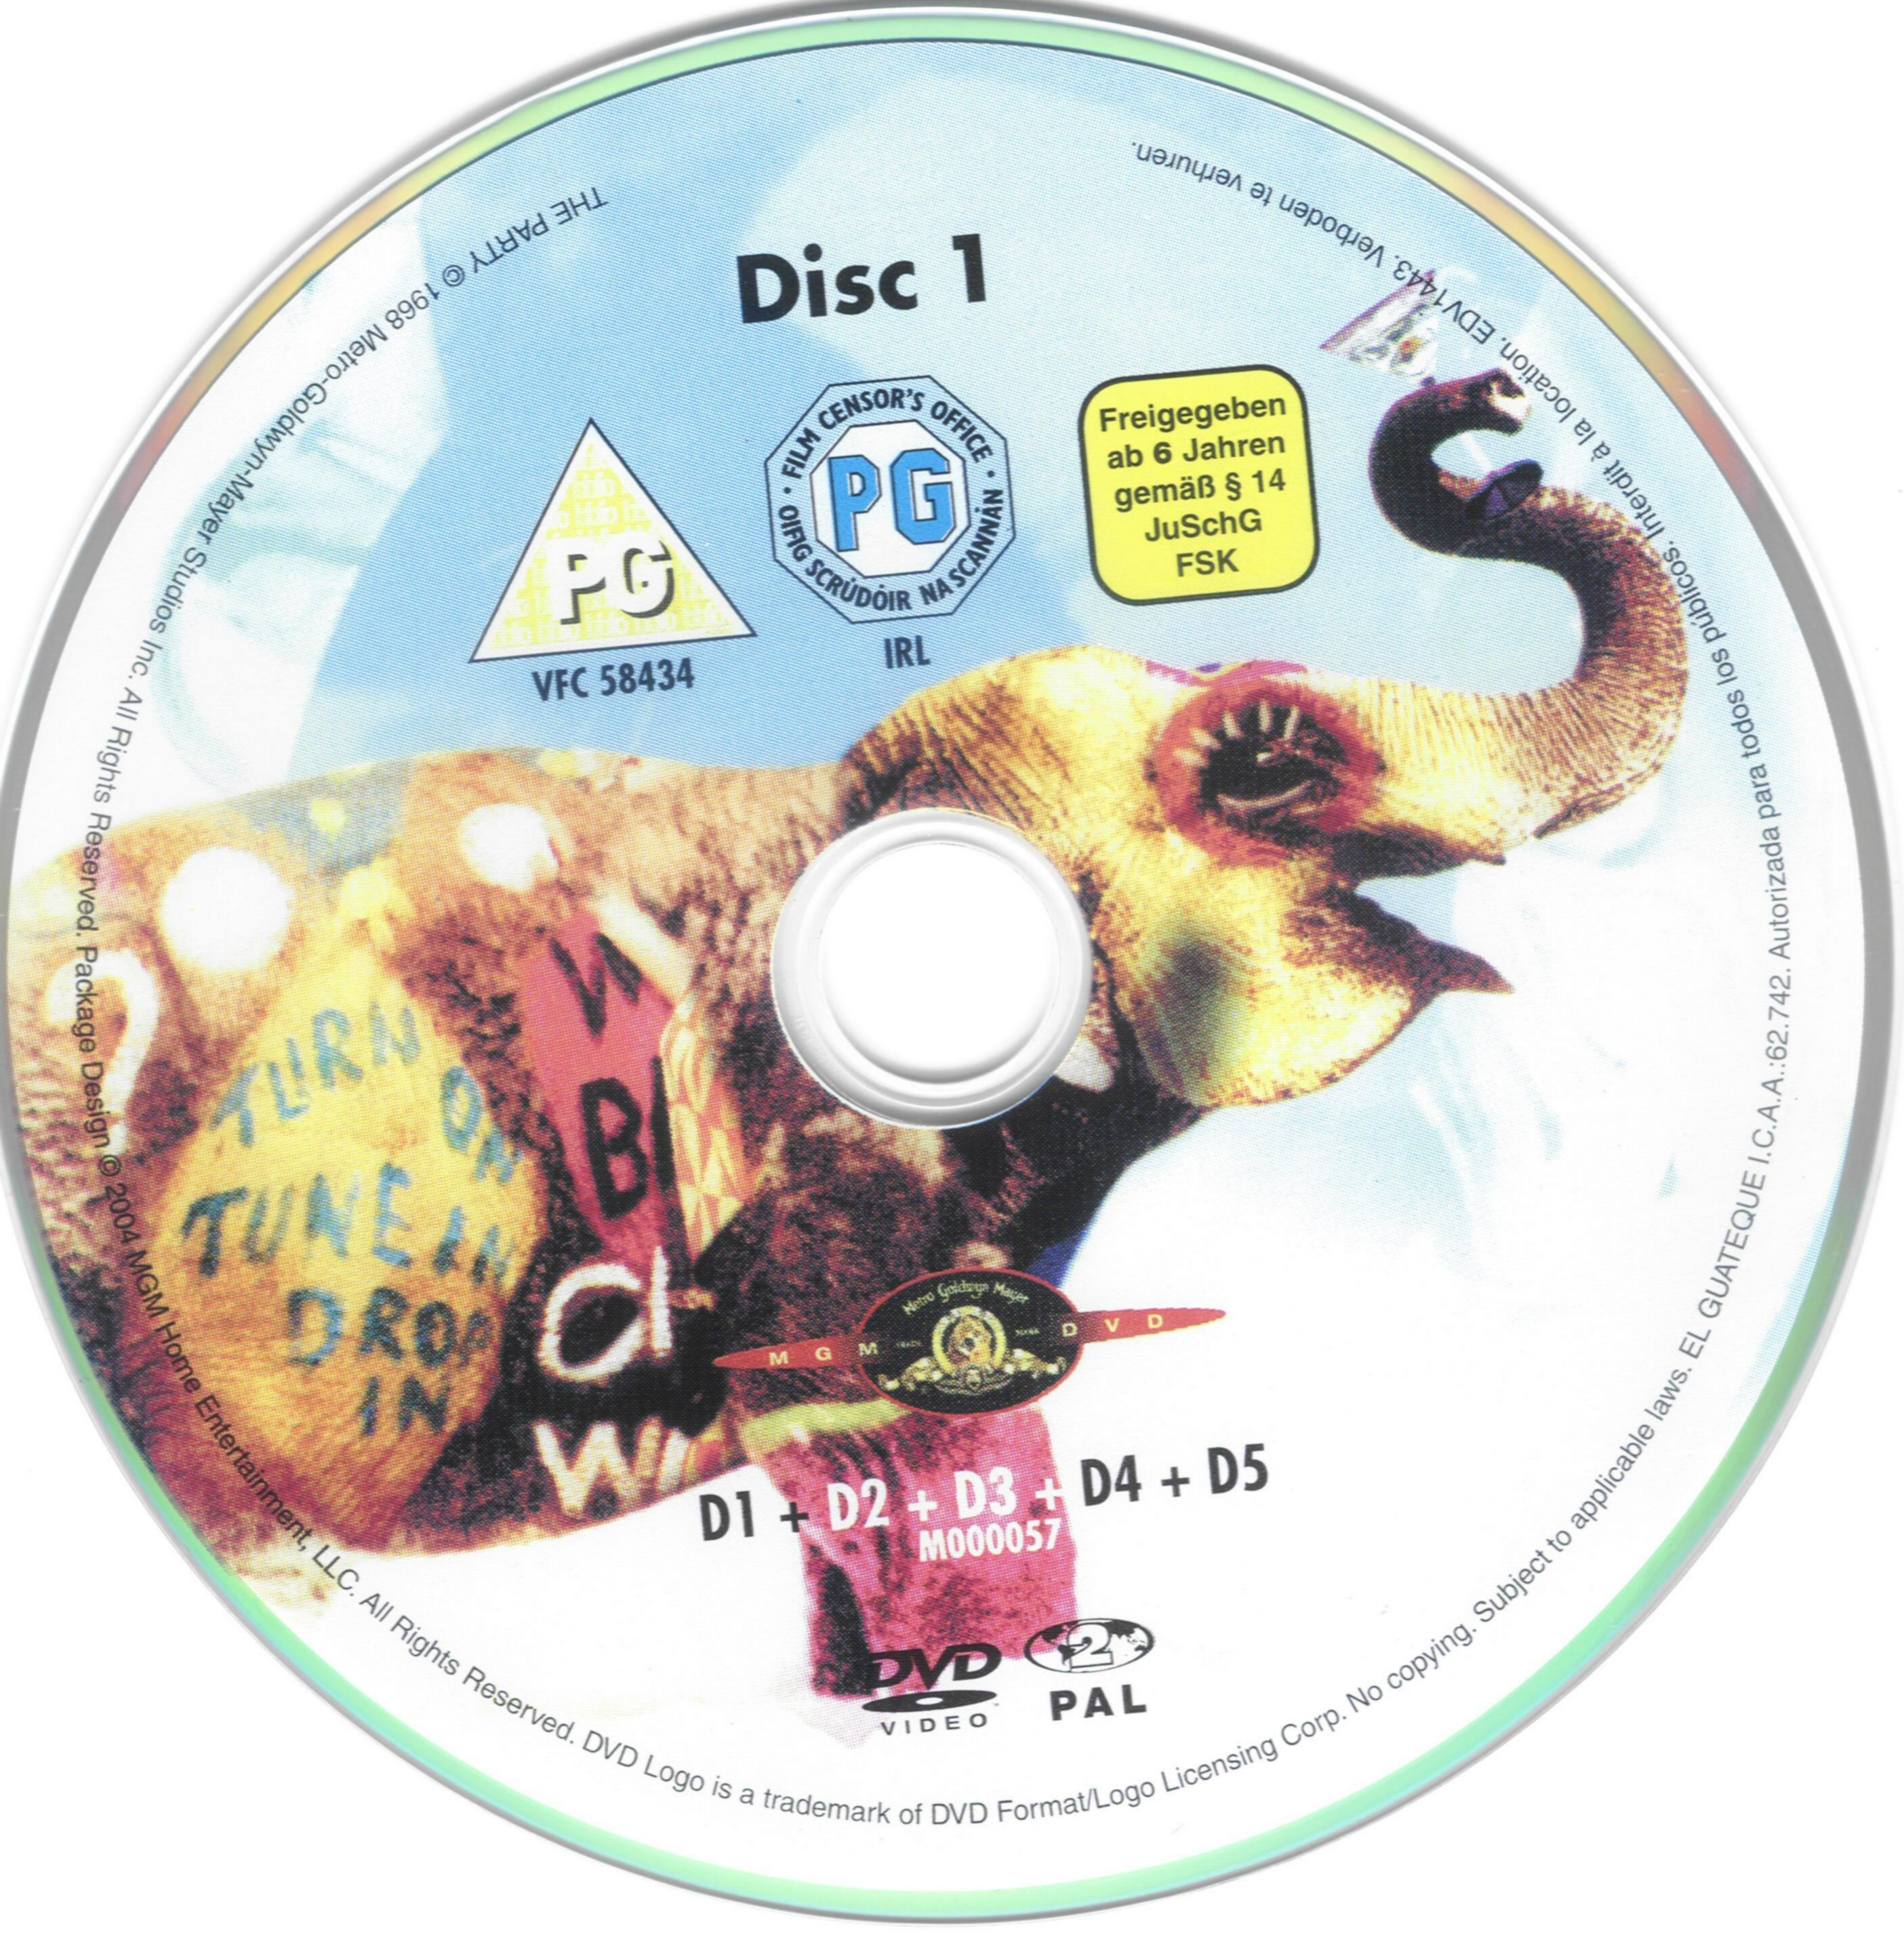 The party DISC 1